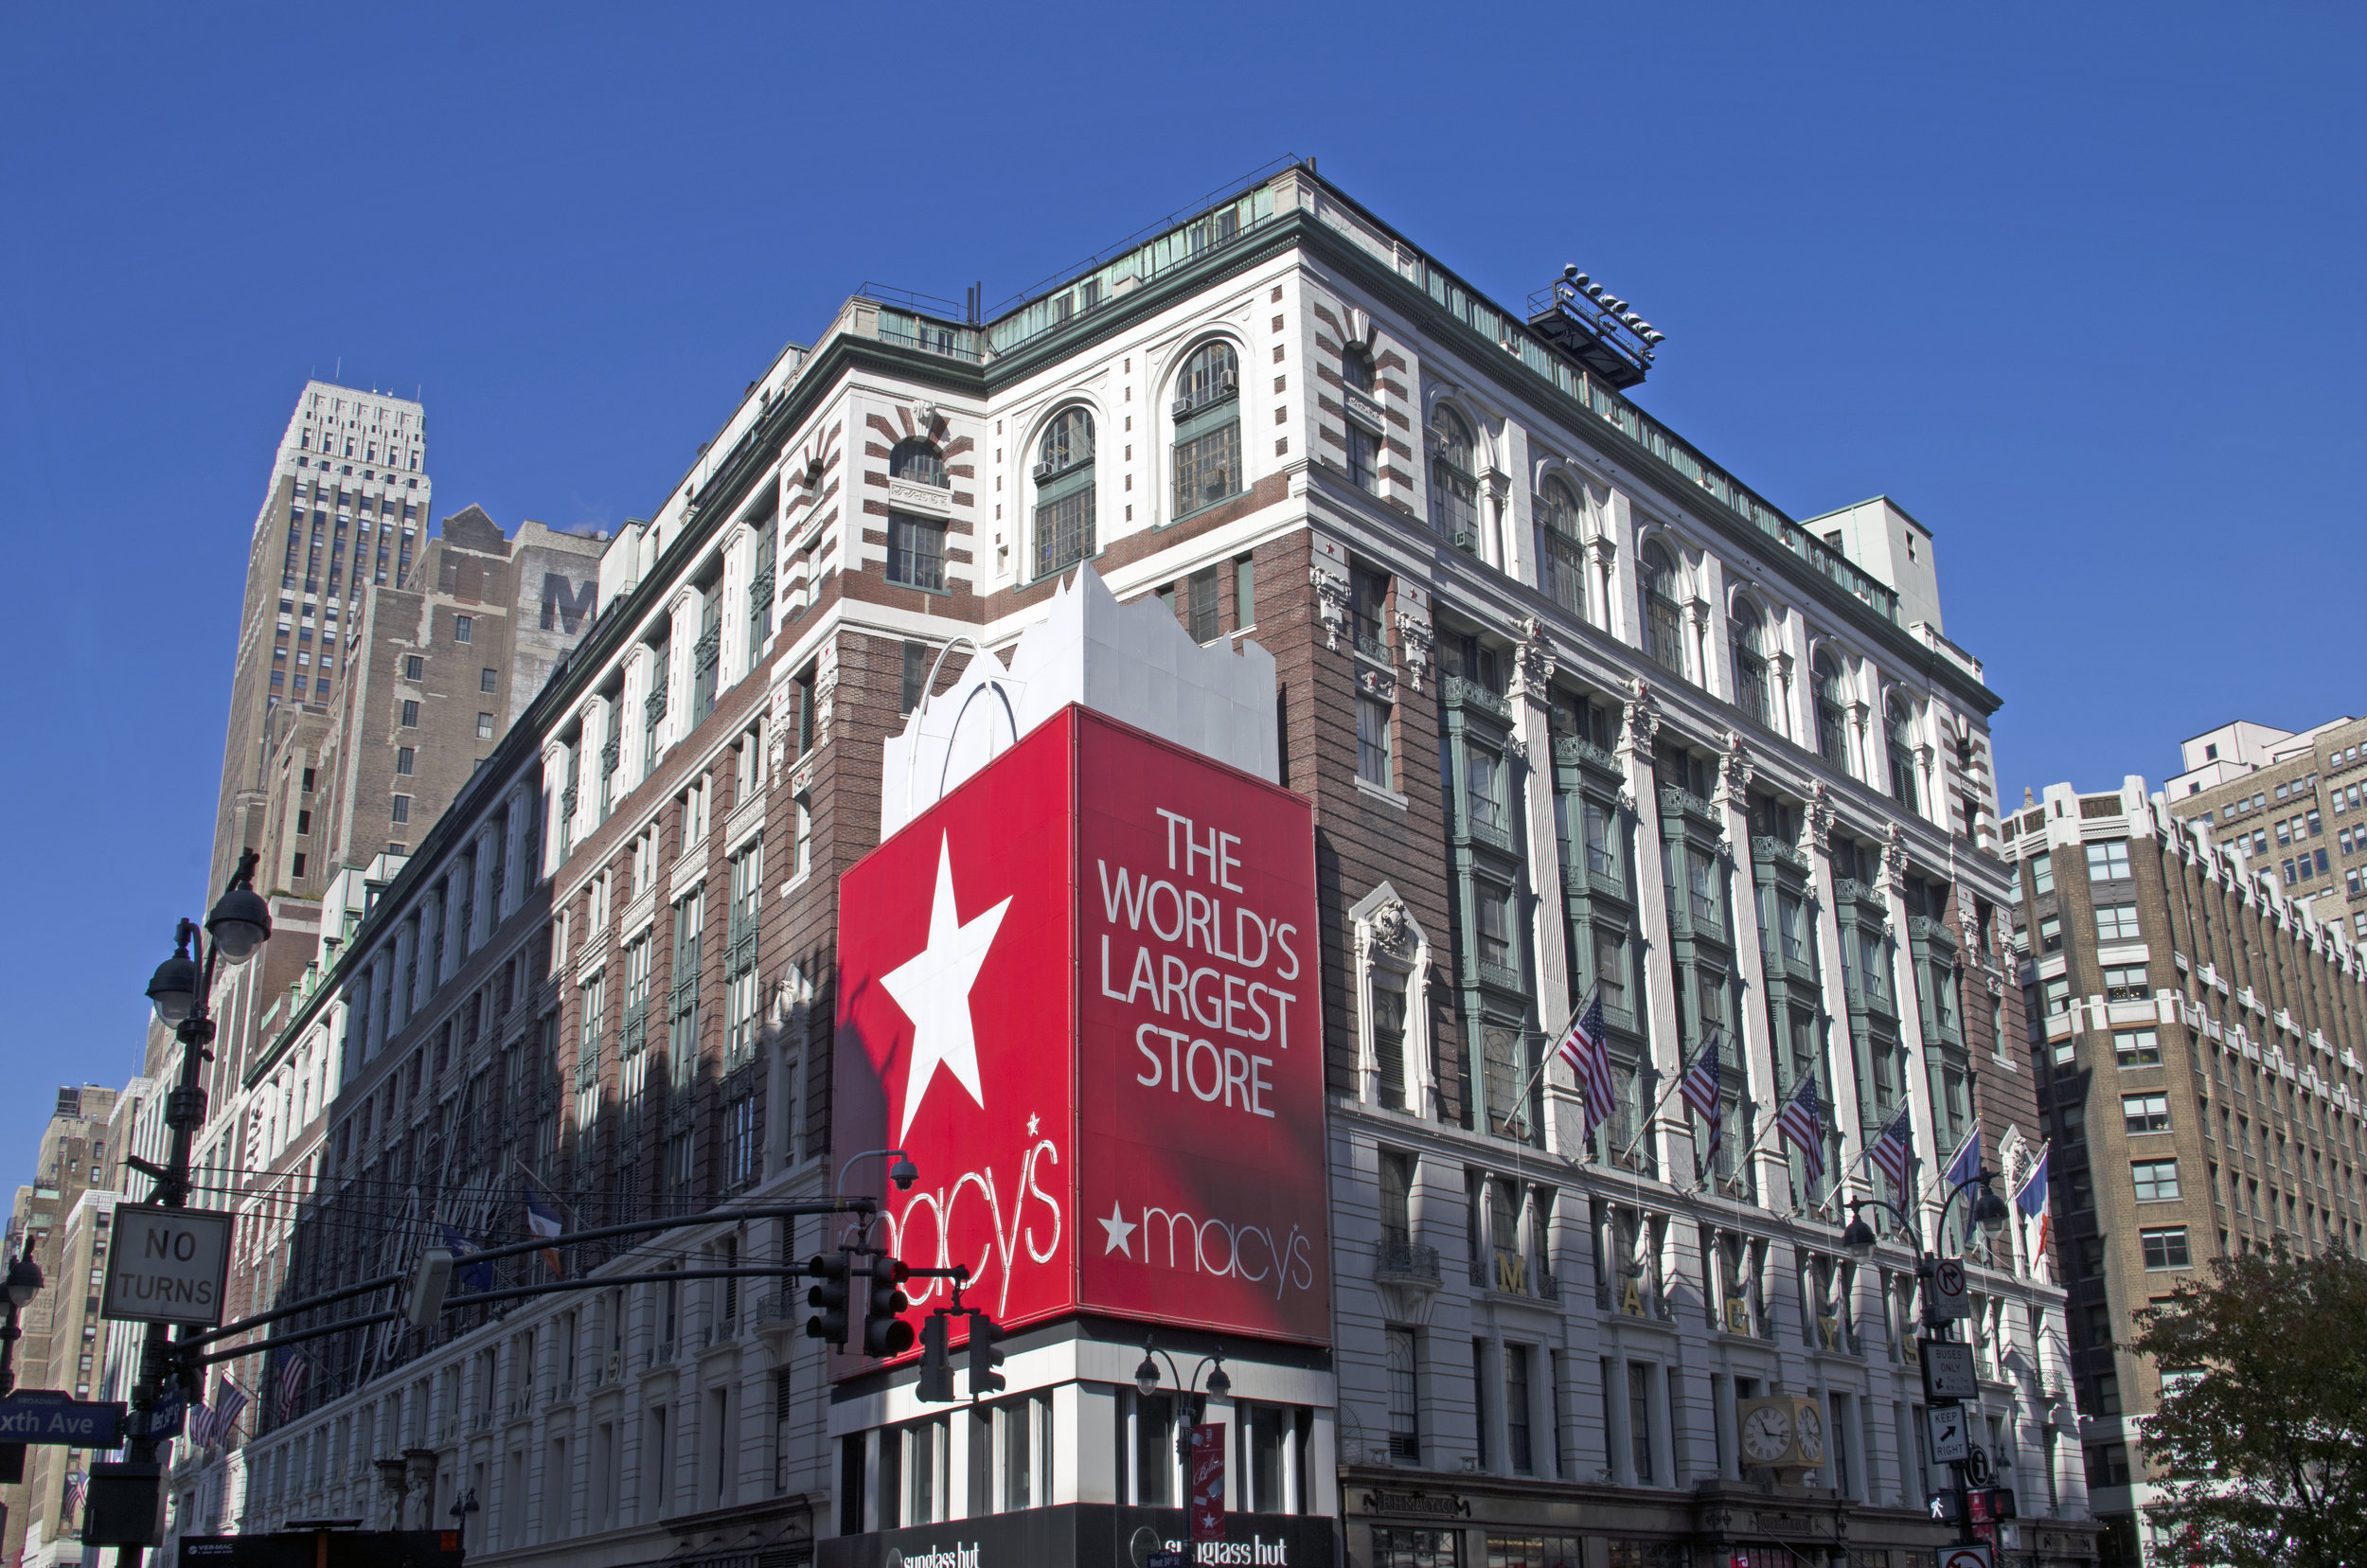 Macy's Herald Square, NYC Retail Design / Charles Sparks + Company